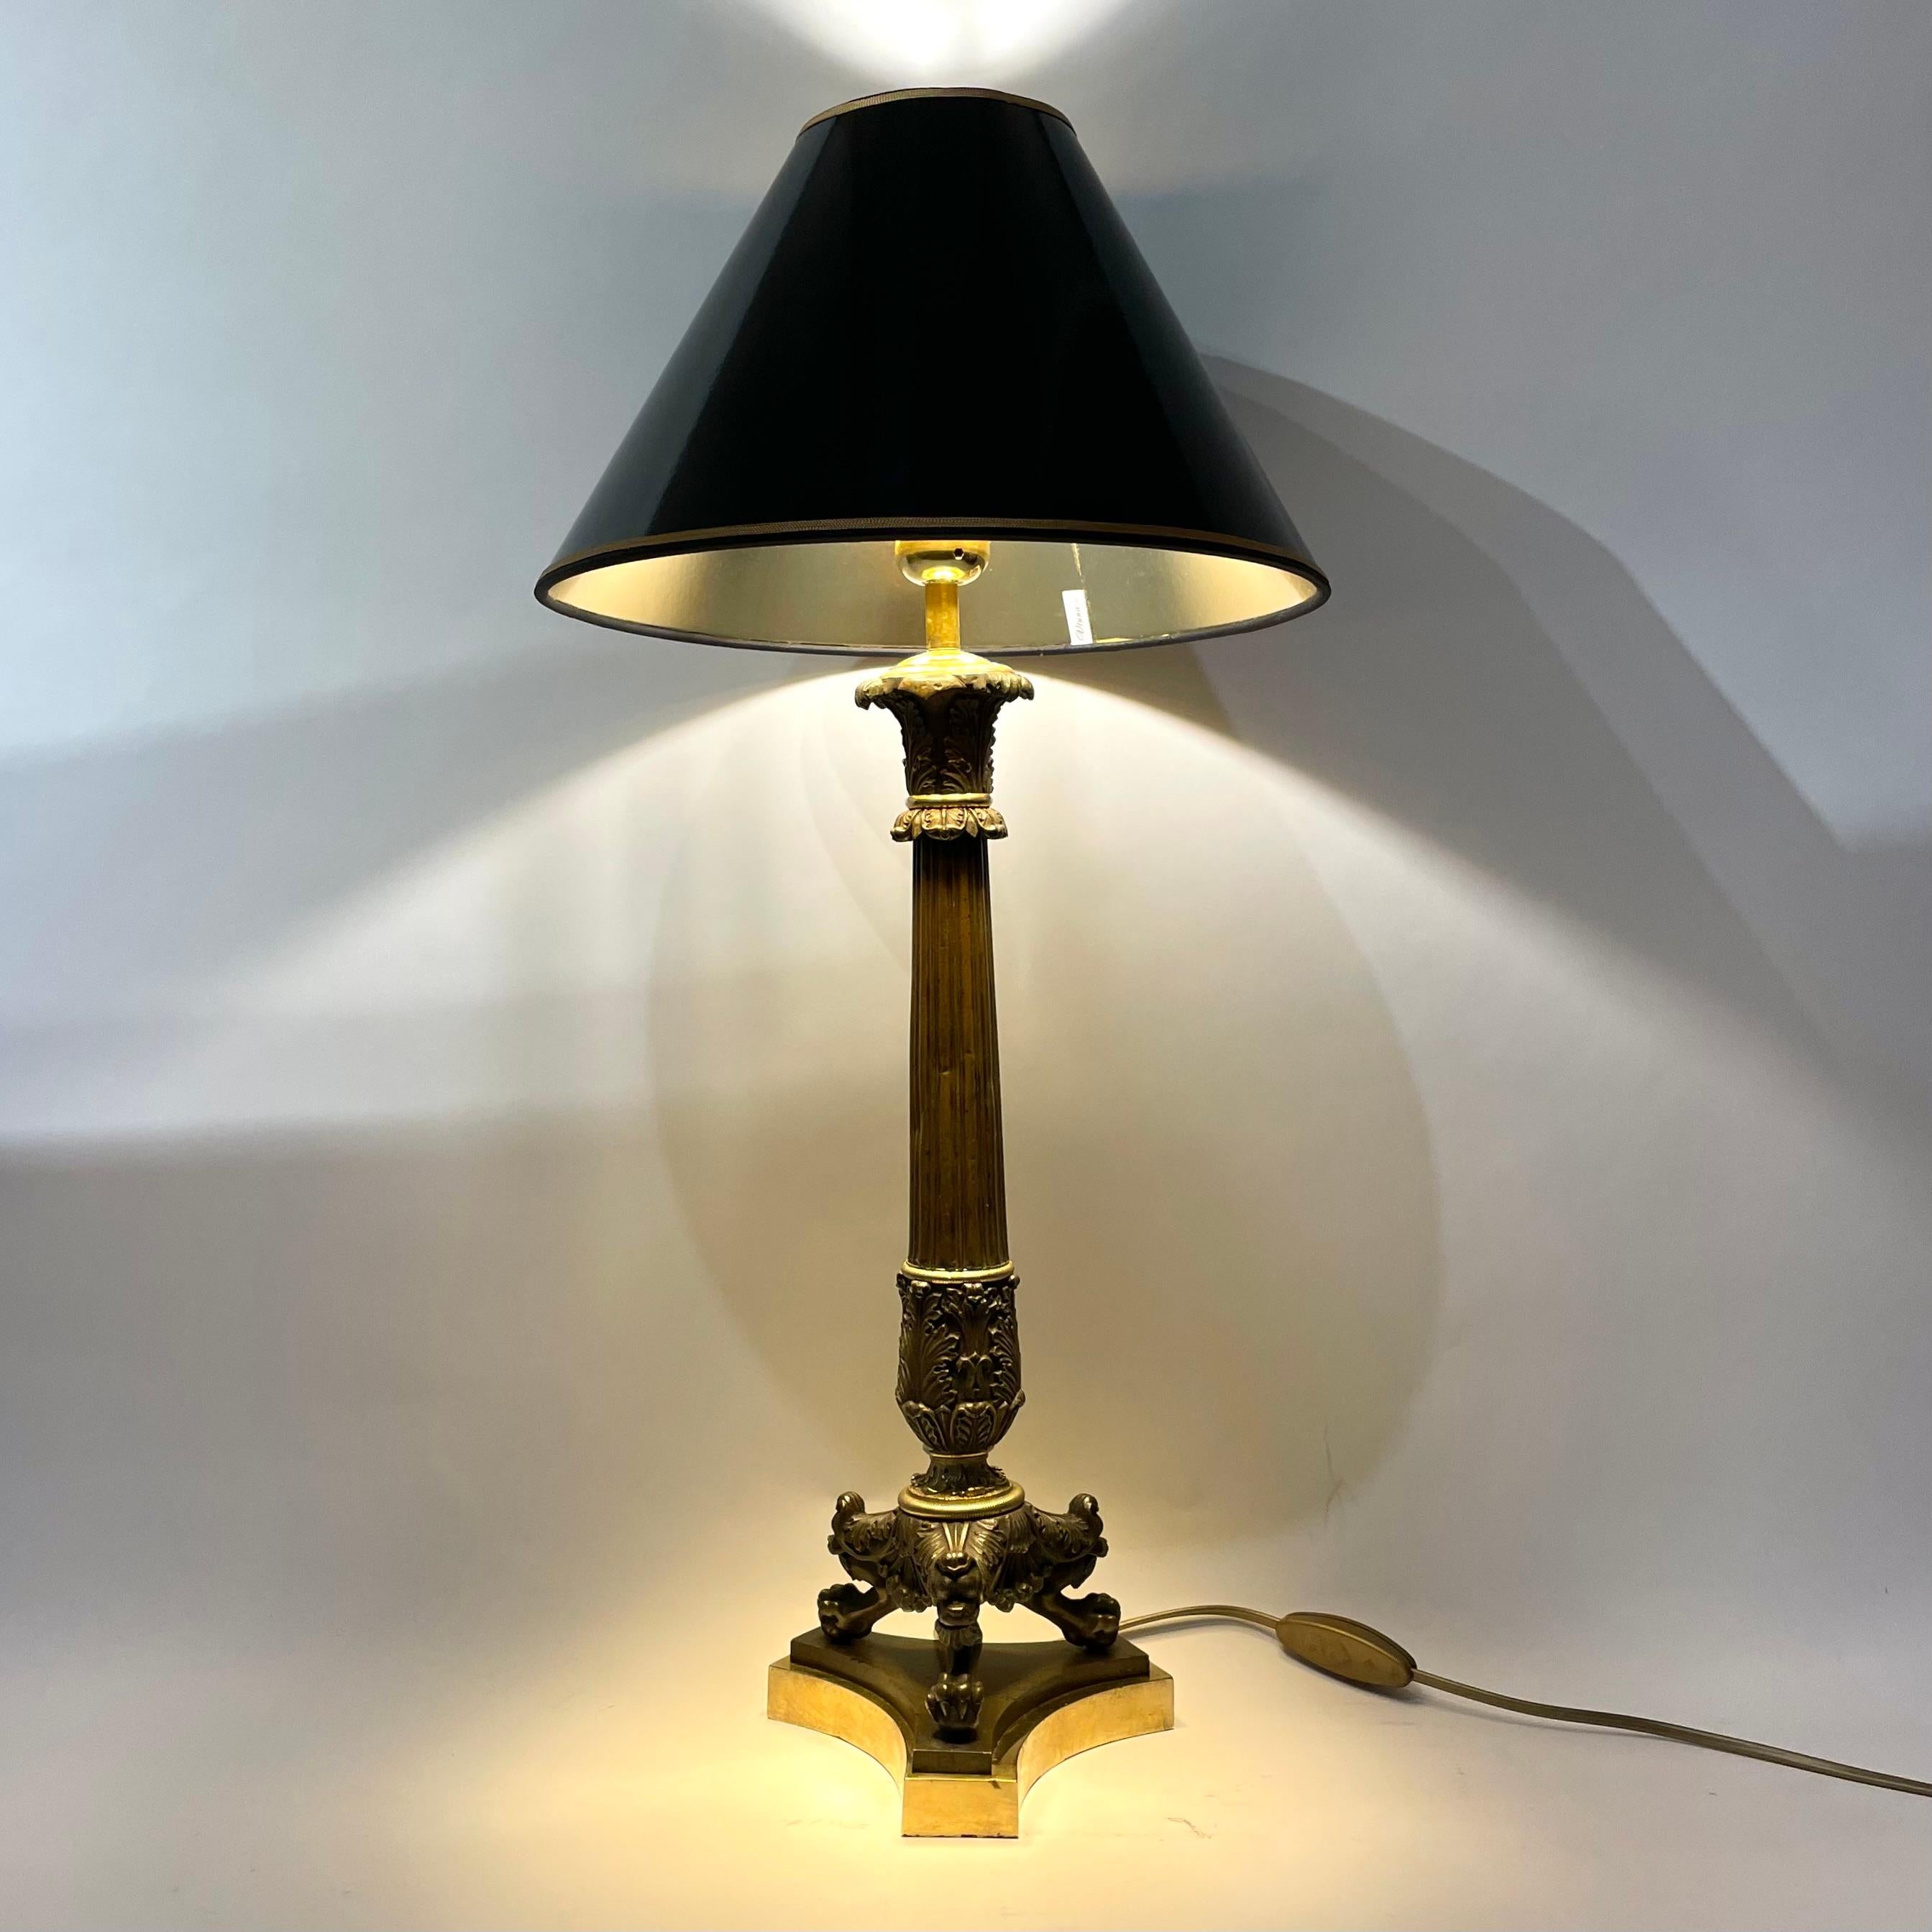 Elegant Table Lamp in gilded and dark patinated bronze. Originally an Empire Candelabra from the 1820s converted into a table lamp in the early 20th Century.

The lampshade in black lacquer with a gilded inside to give a cozy light.

Newly rewired